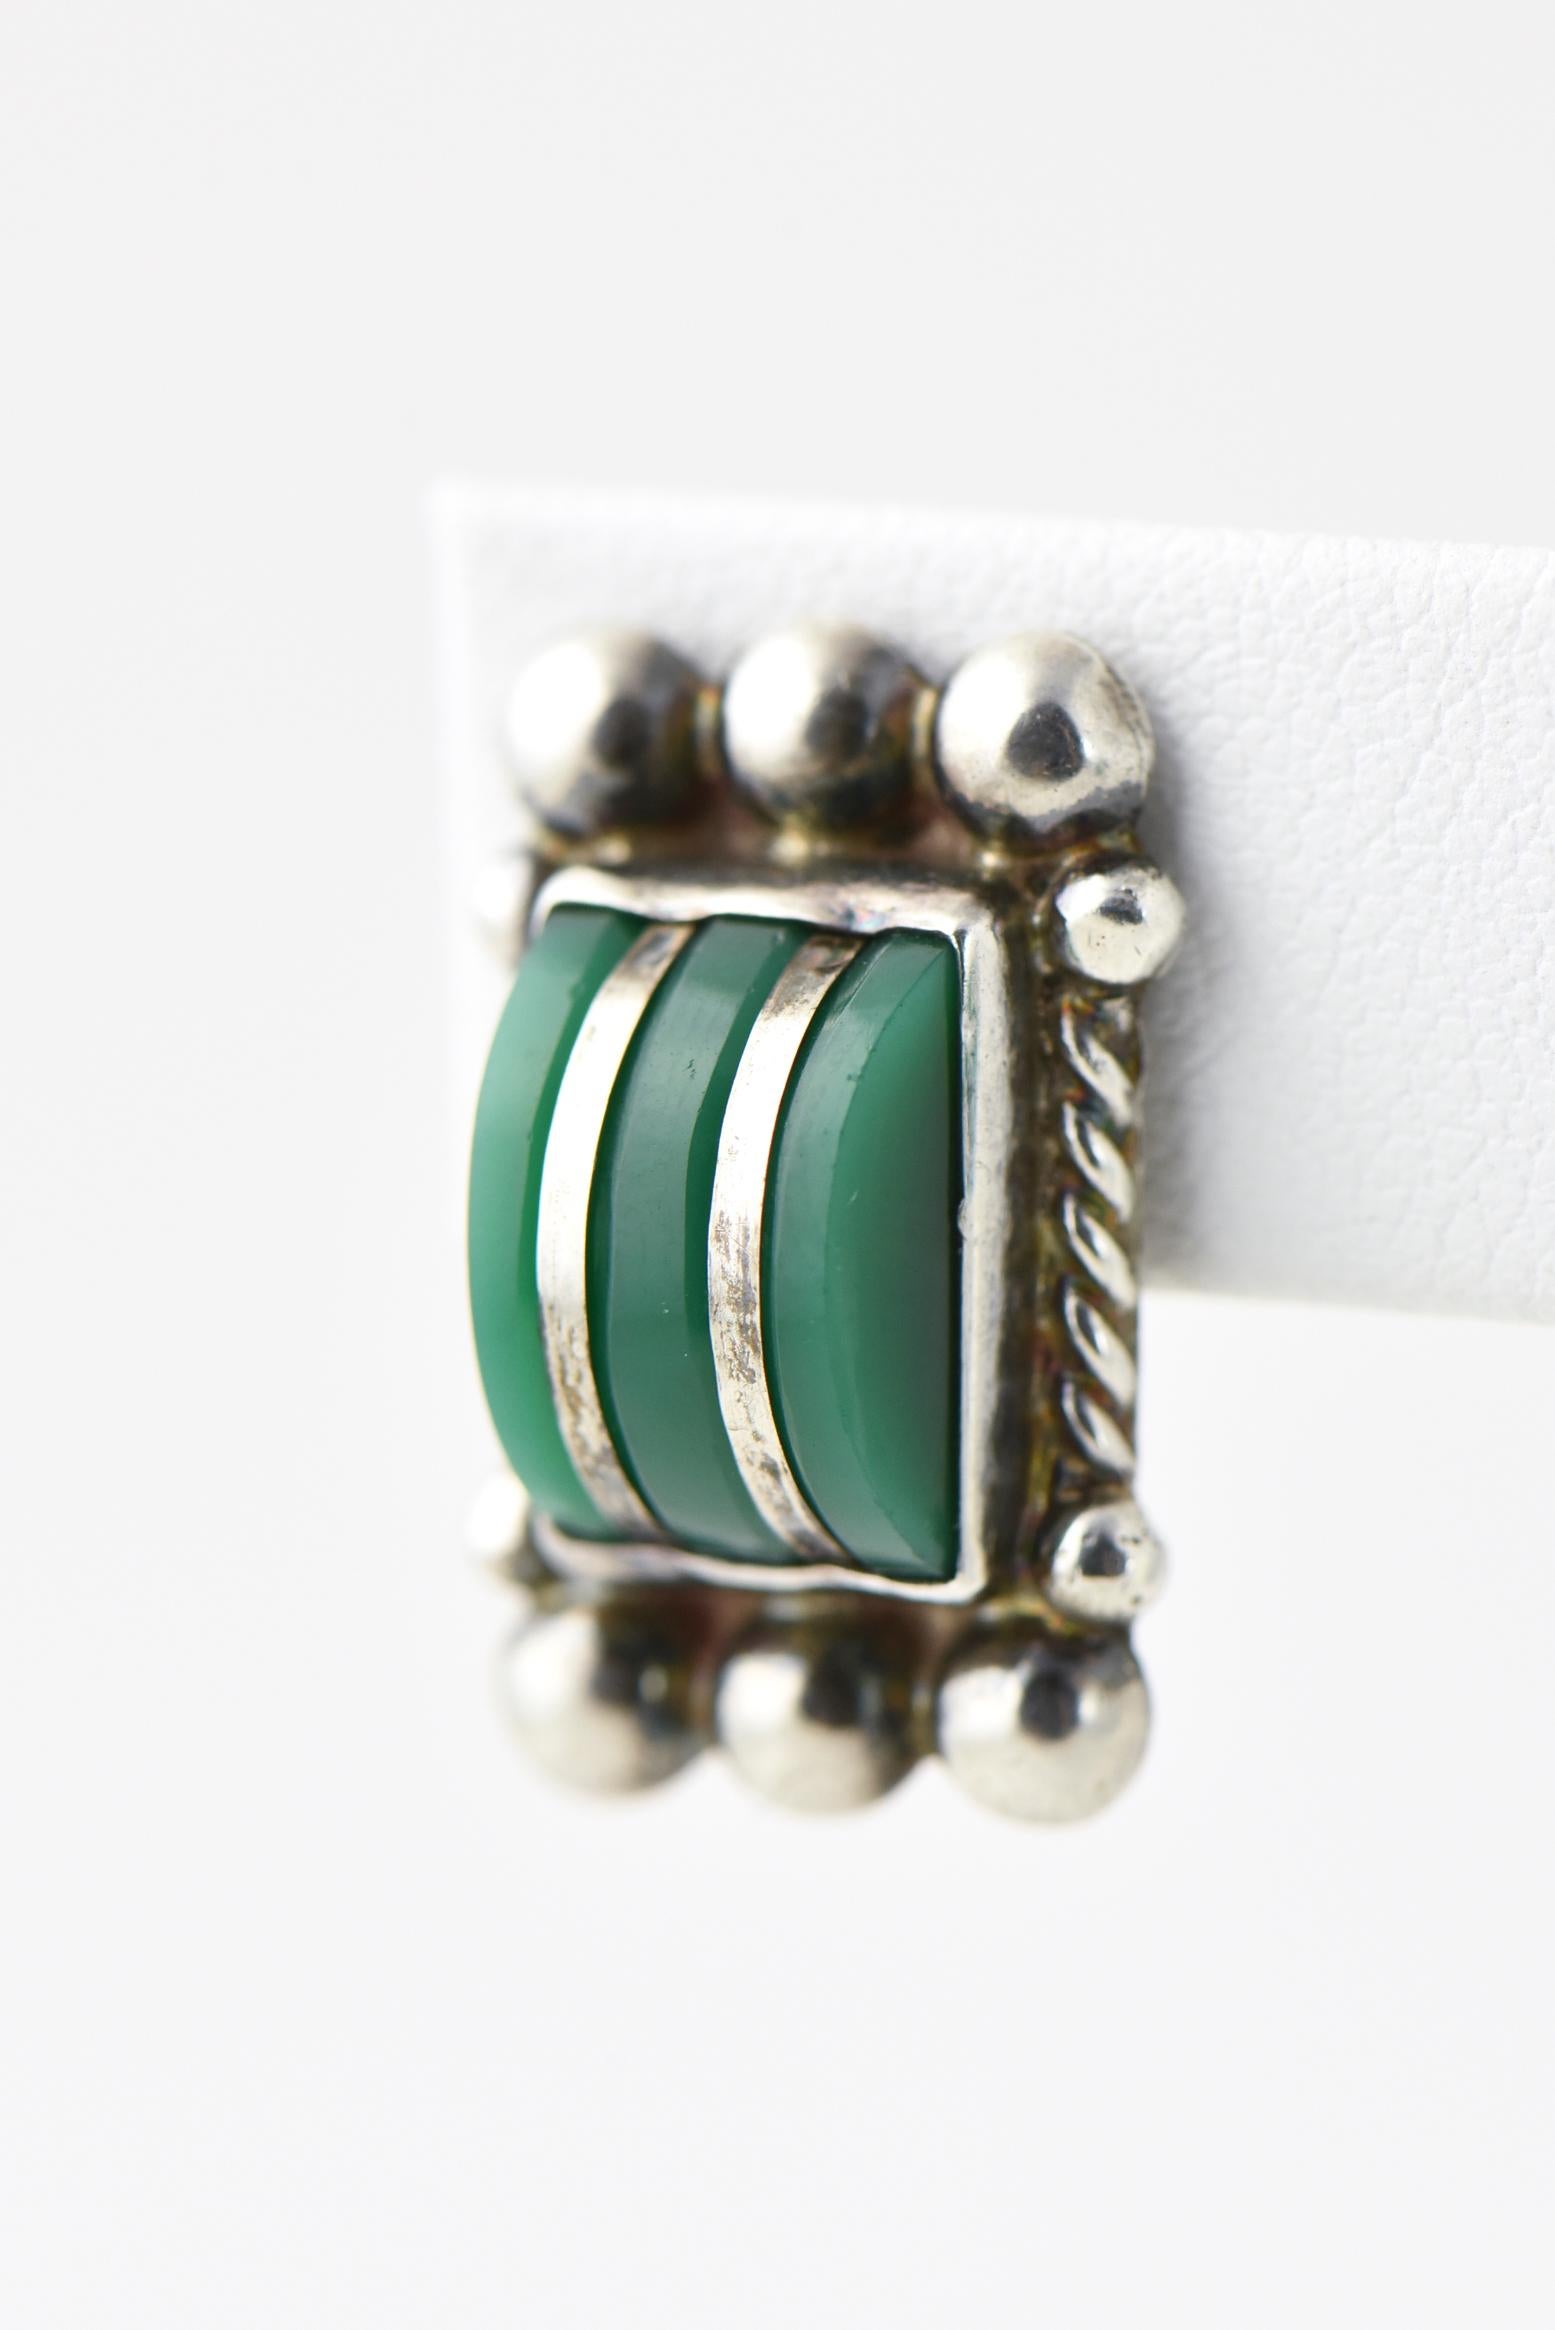 Sterling silver and green onyx inlay earrings designed by a Mexican artist. The outer sides have a coiled column with large sterling orbs at the top and bottom edges. Illegibly signed, possibly Jiaz Santov. Screws back. Age wear.
